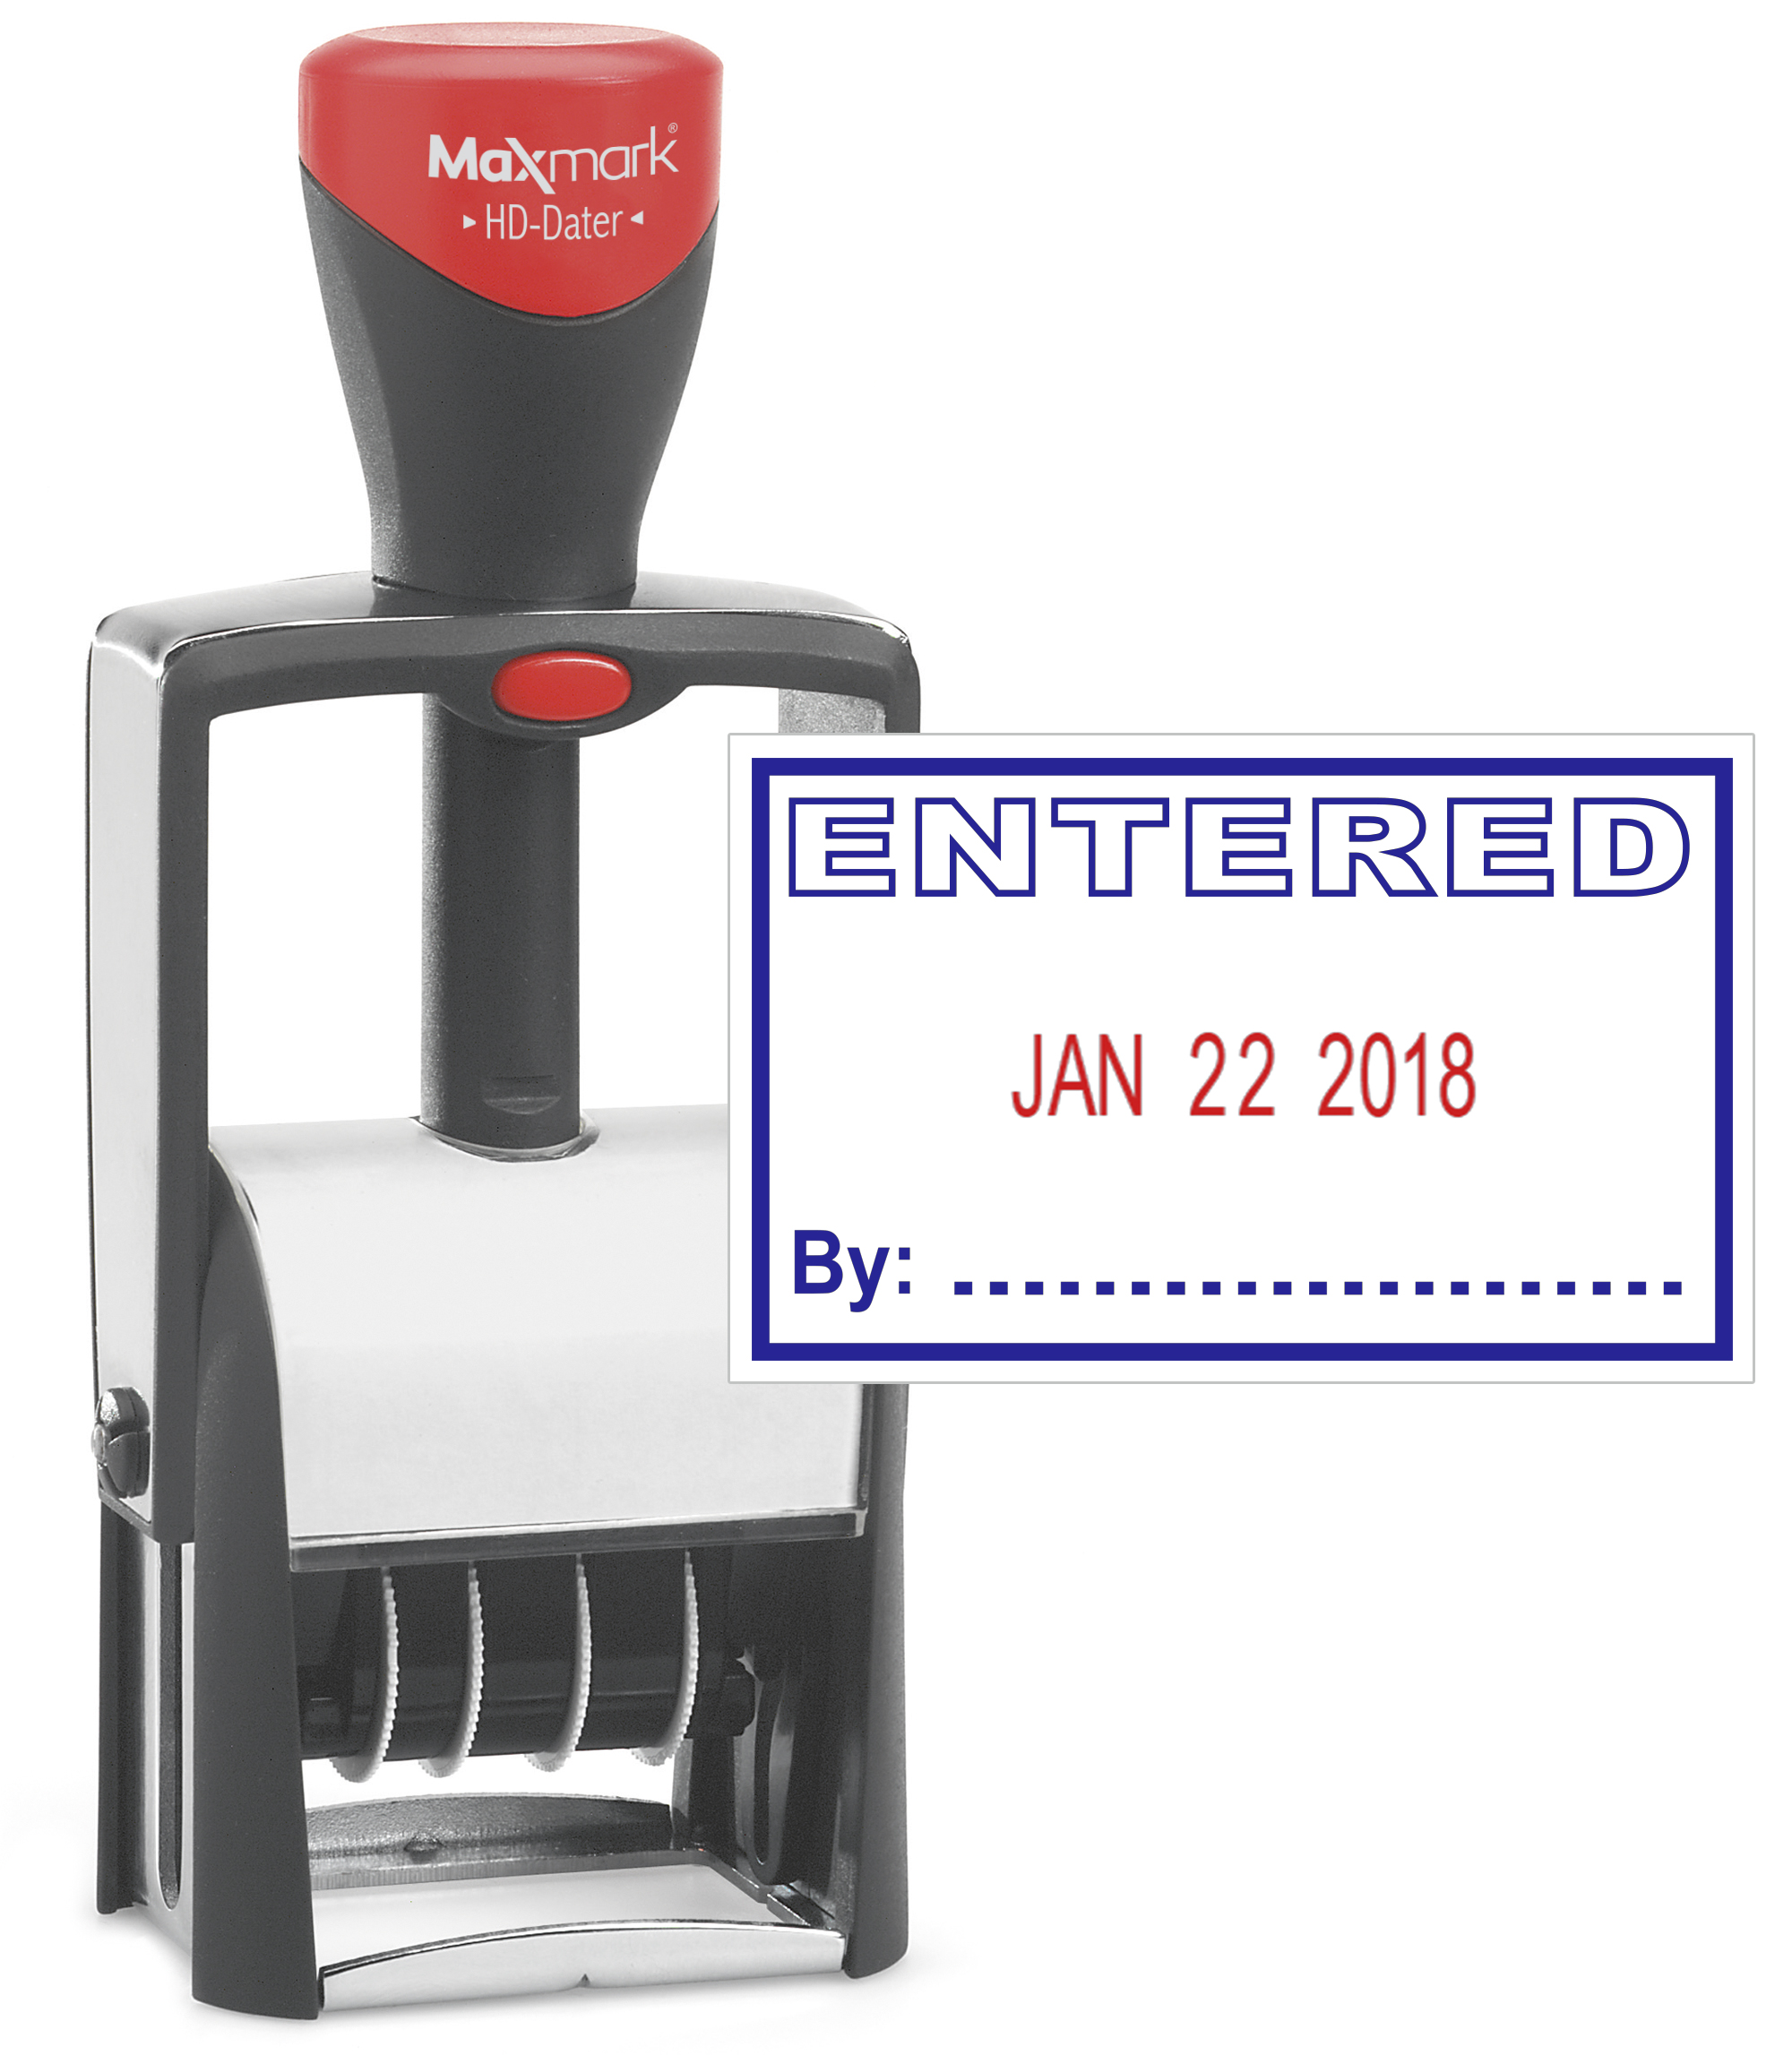 Heavy Duty Date Stamp with "ENTERED" Self Inking Stamp - 2 Color Blue/Red Ink